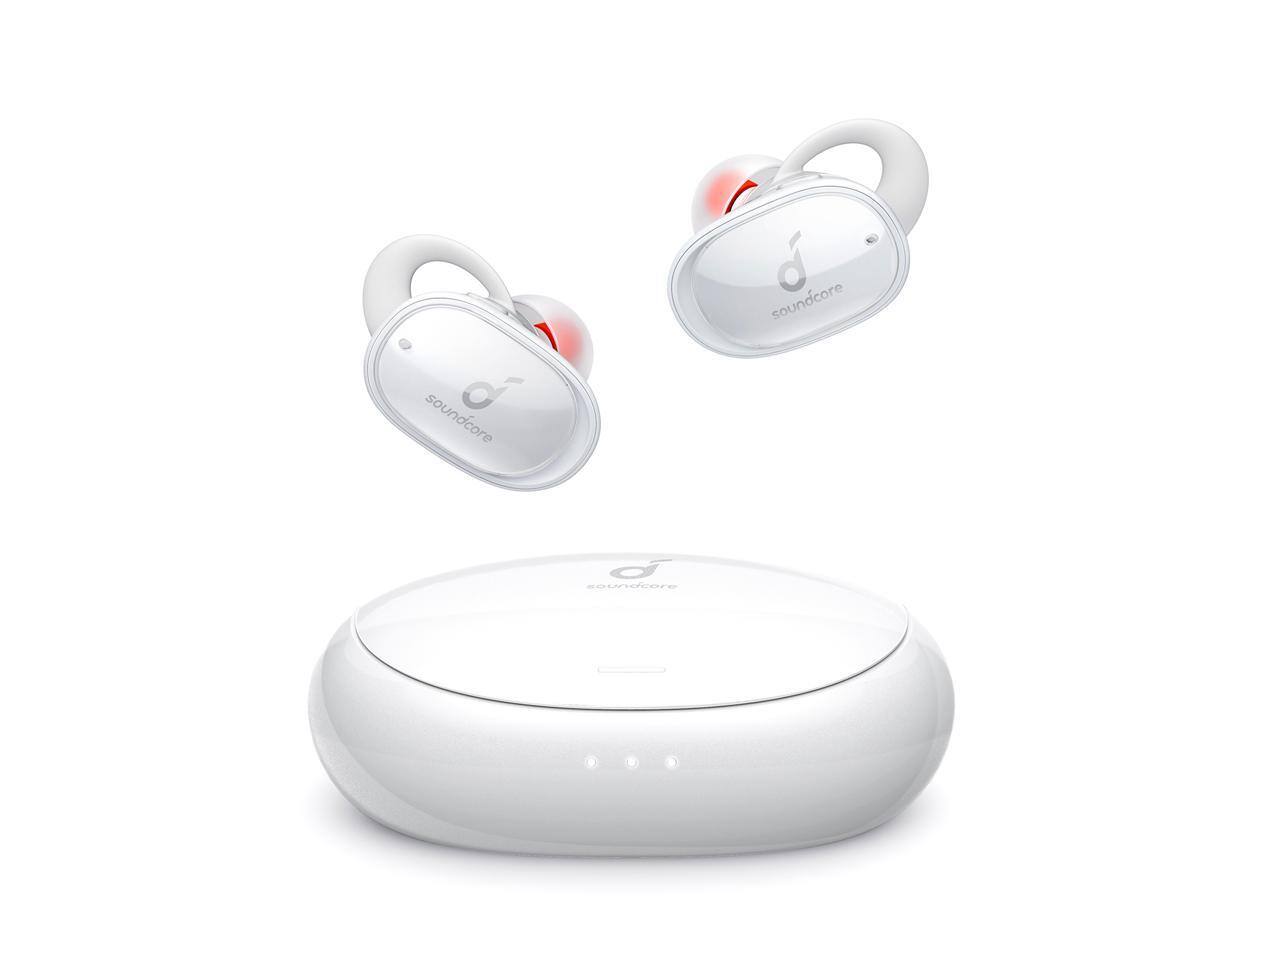 Anker Soundcore Liberty 2 Wireless Earbuds $50 + Free Shipping $49.99